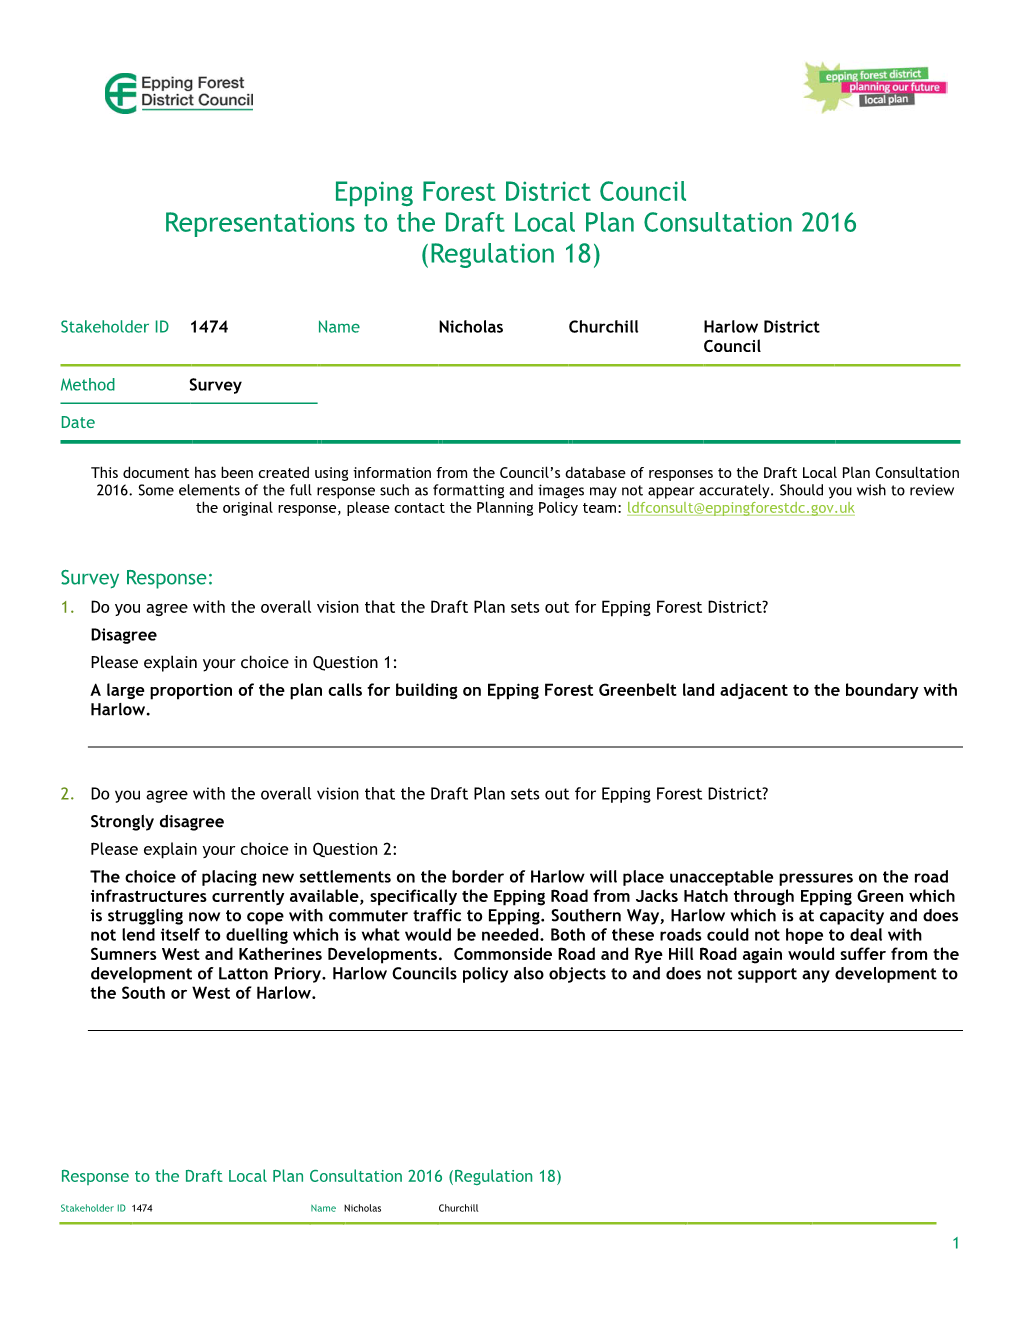 Epping Forest District Council Representations to the Draft Local Plan Consultation 2016 (Regulation 18)